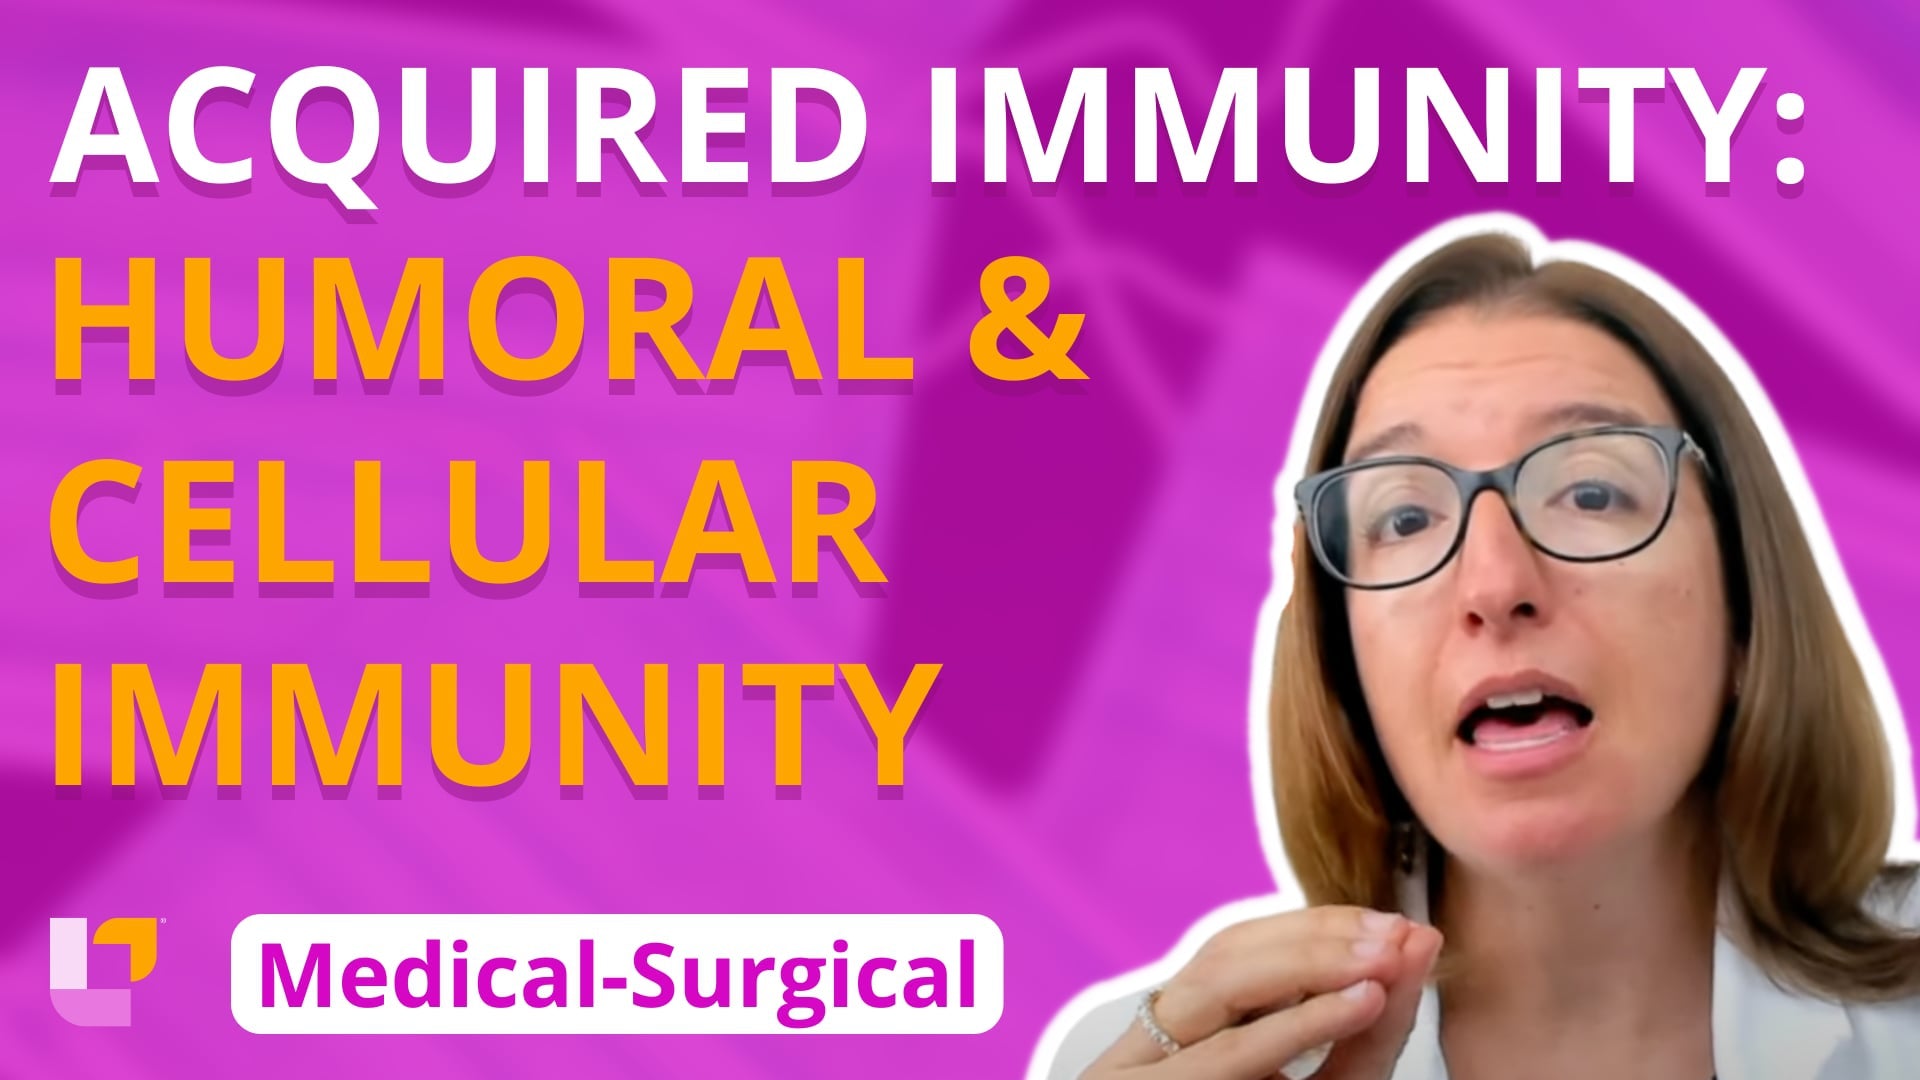 Med-Surg Immune System, part 2: Acquired Immunity - Humoral and Cellular - LevelUpRN